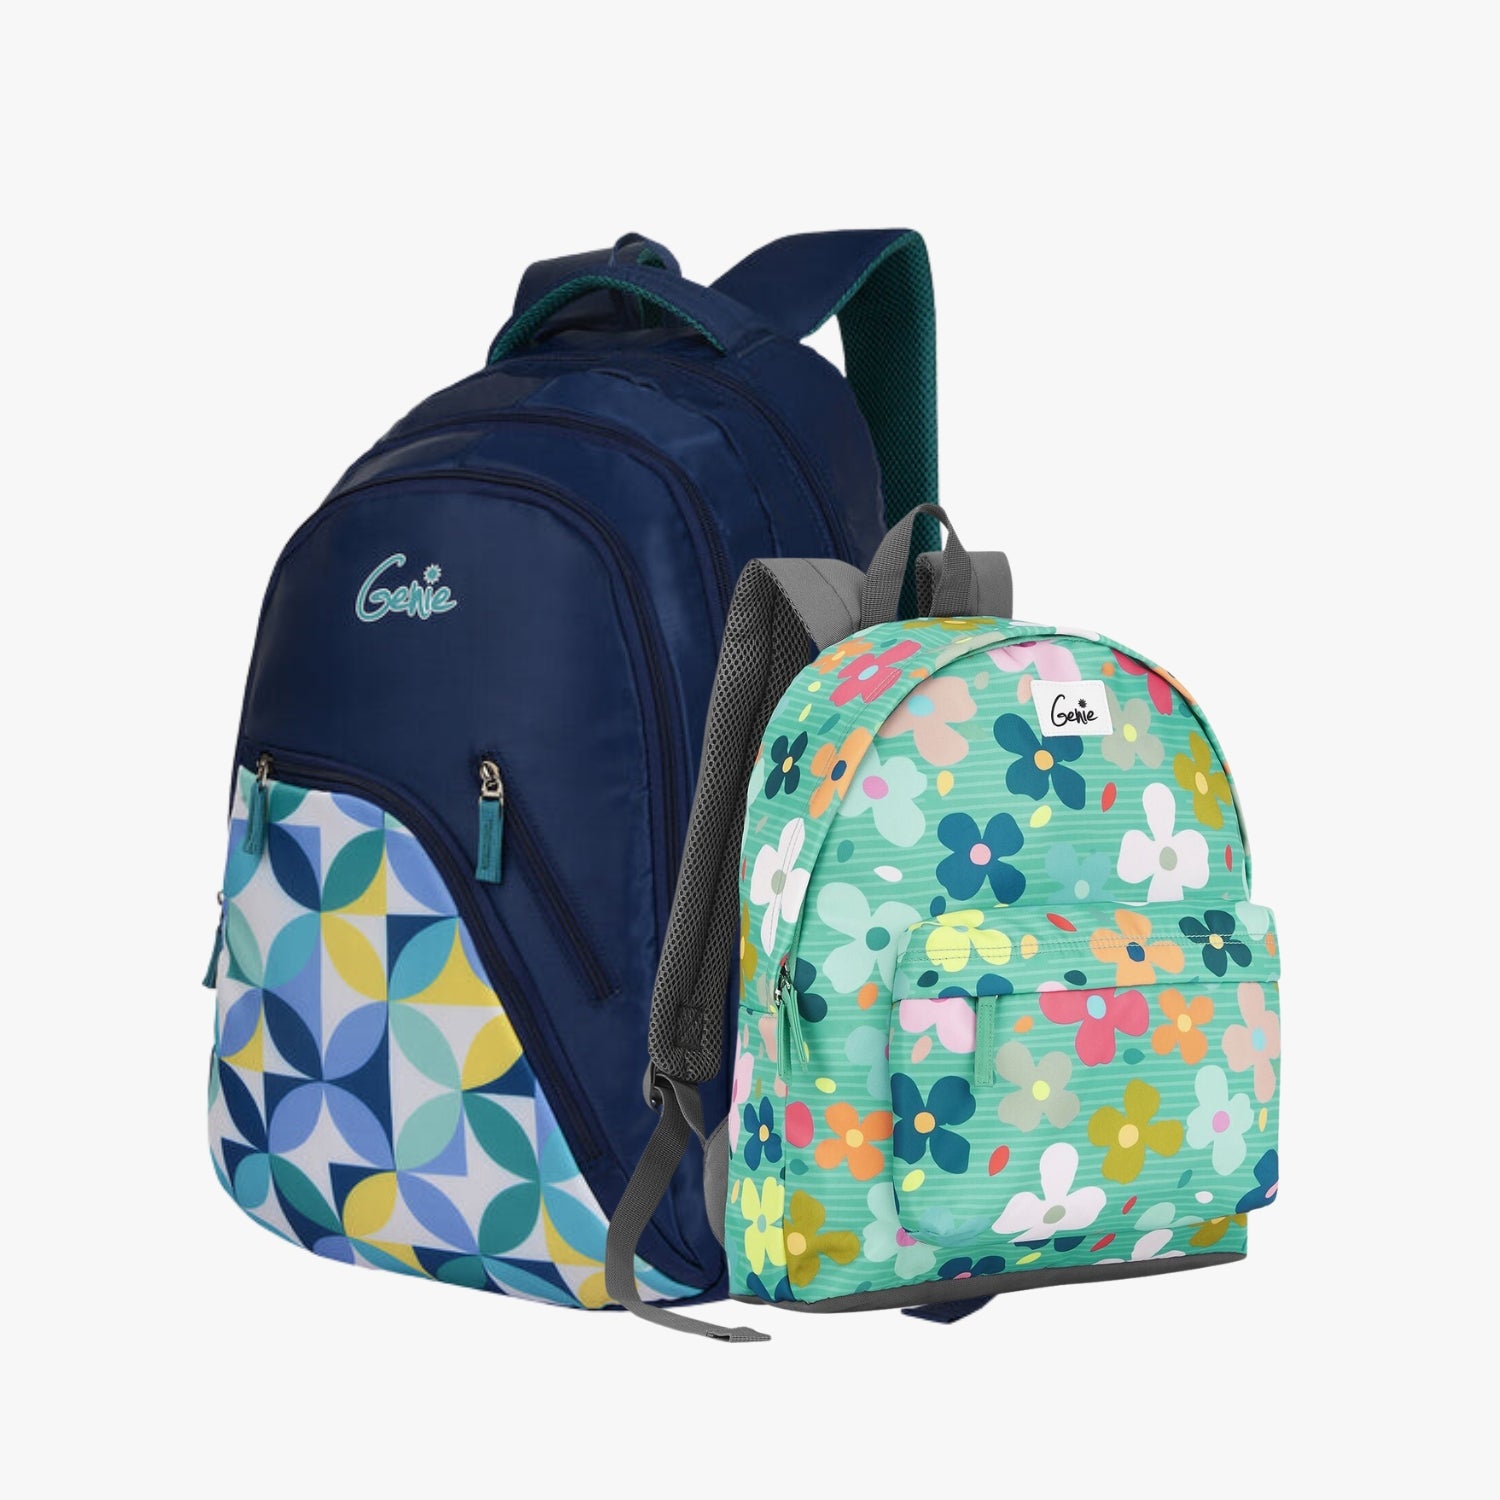 Genie School Backpack and Casual Backpack Combo